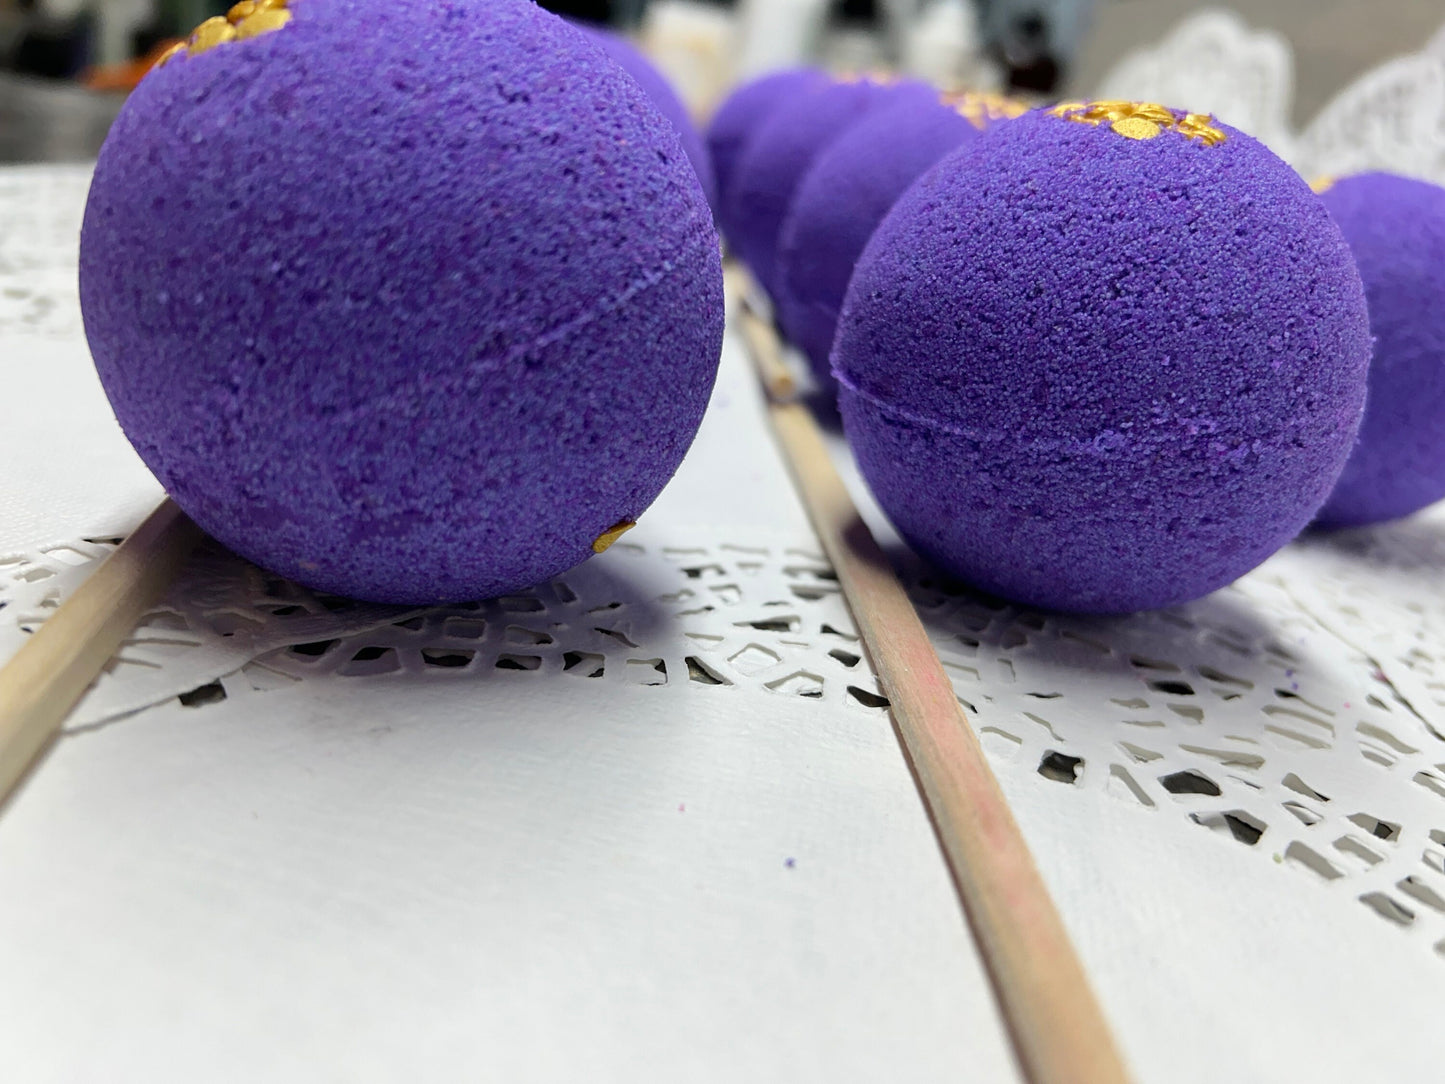 Bath Bomb - Lavender Bath Bombs with Embeds of colors topped with gold sugar sprinkles